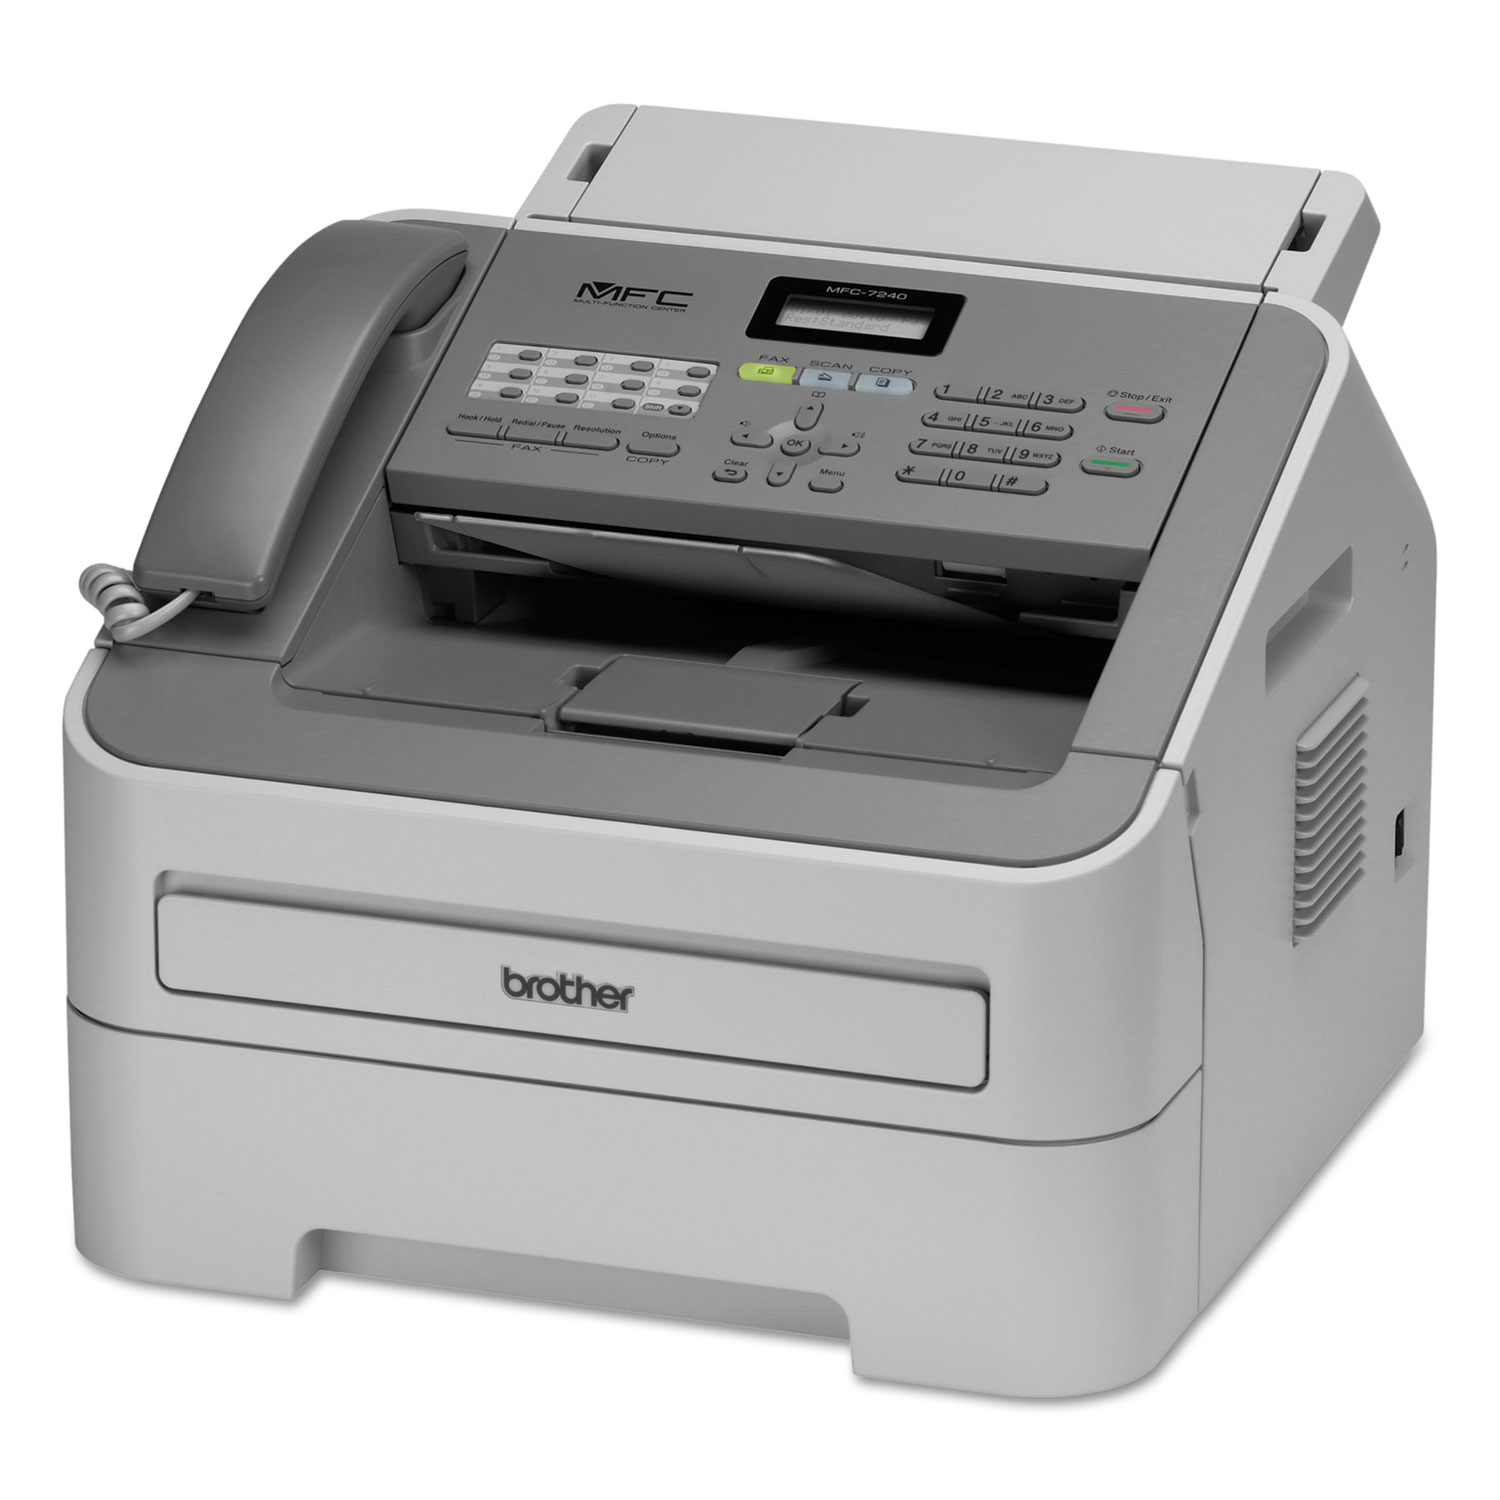 MFC-7240 All-in-One Laser Printer, Copy/Fax/Print/Scan